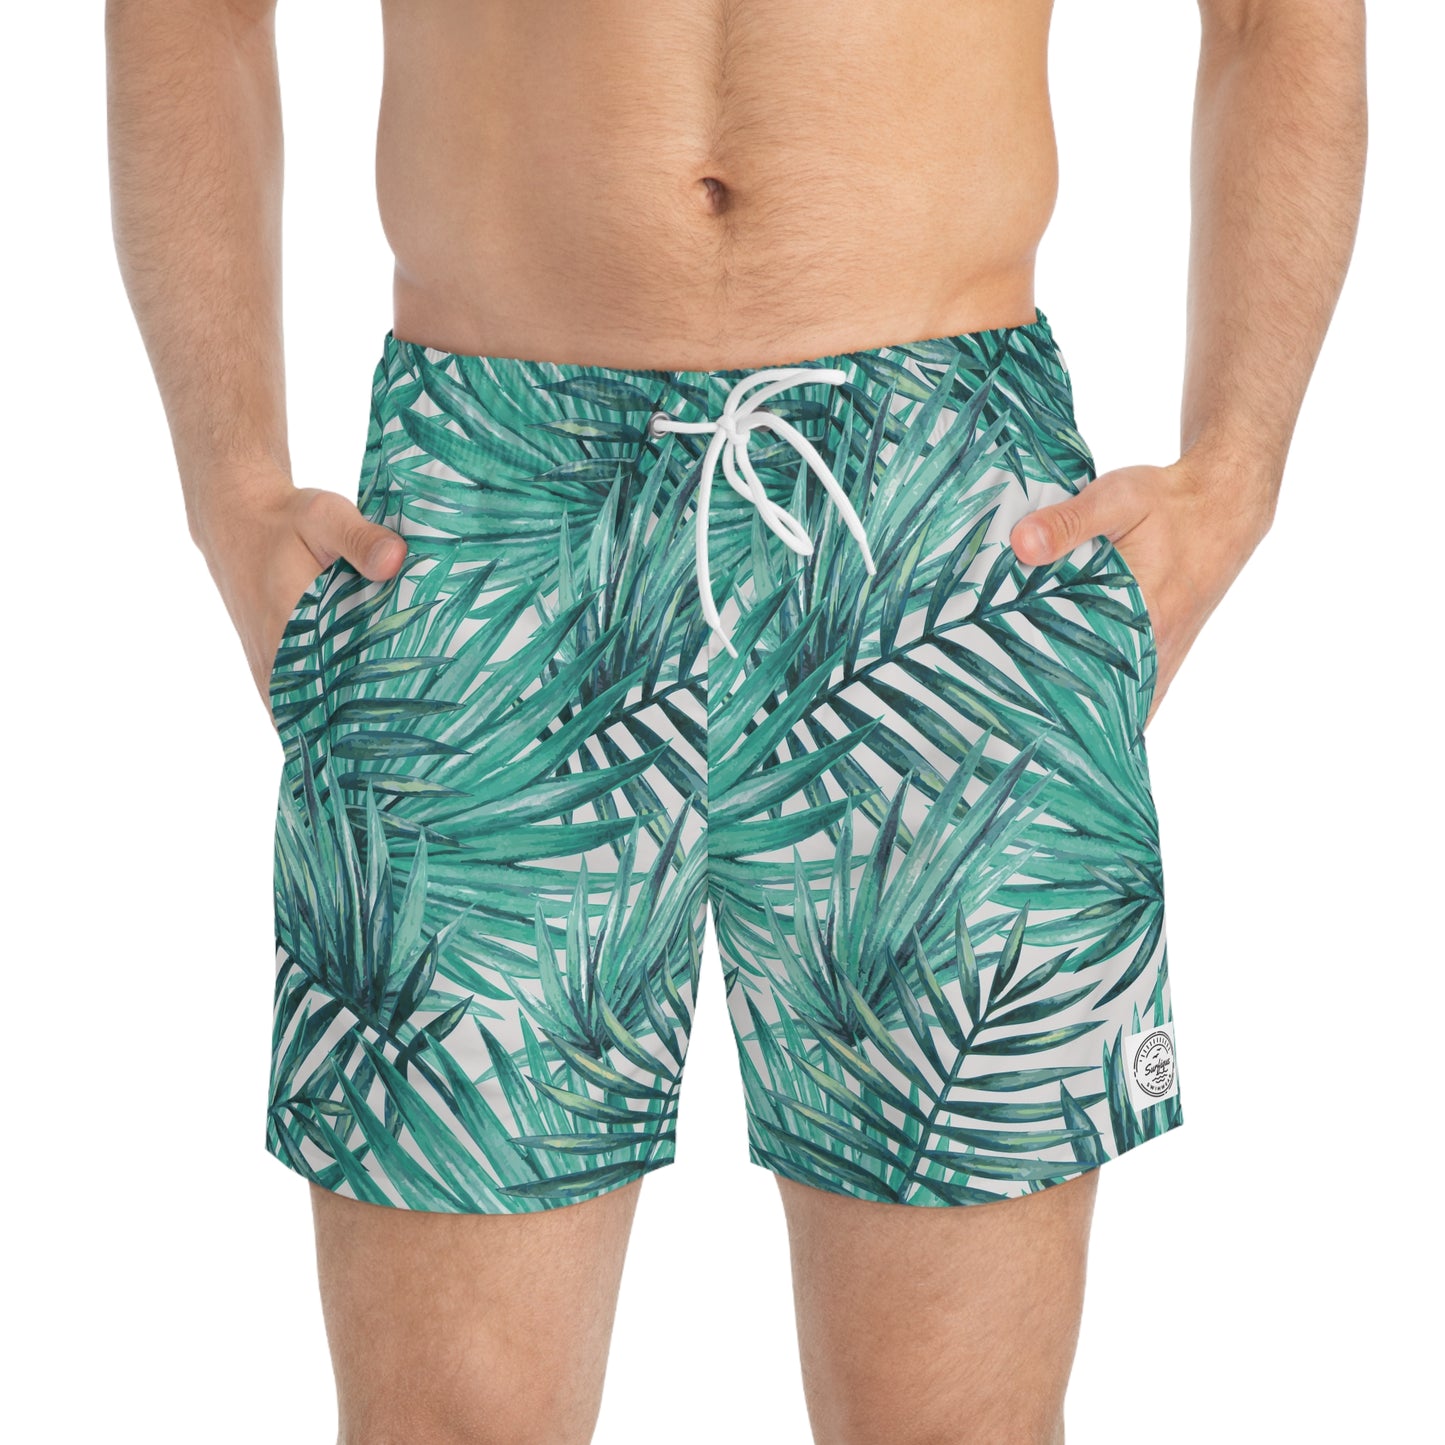 Blue Palm Leaves Swimsuit